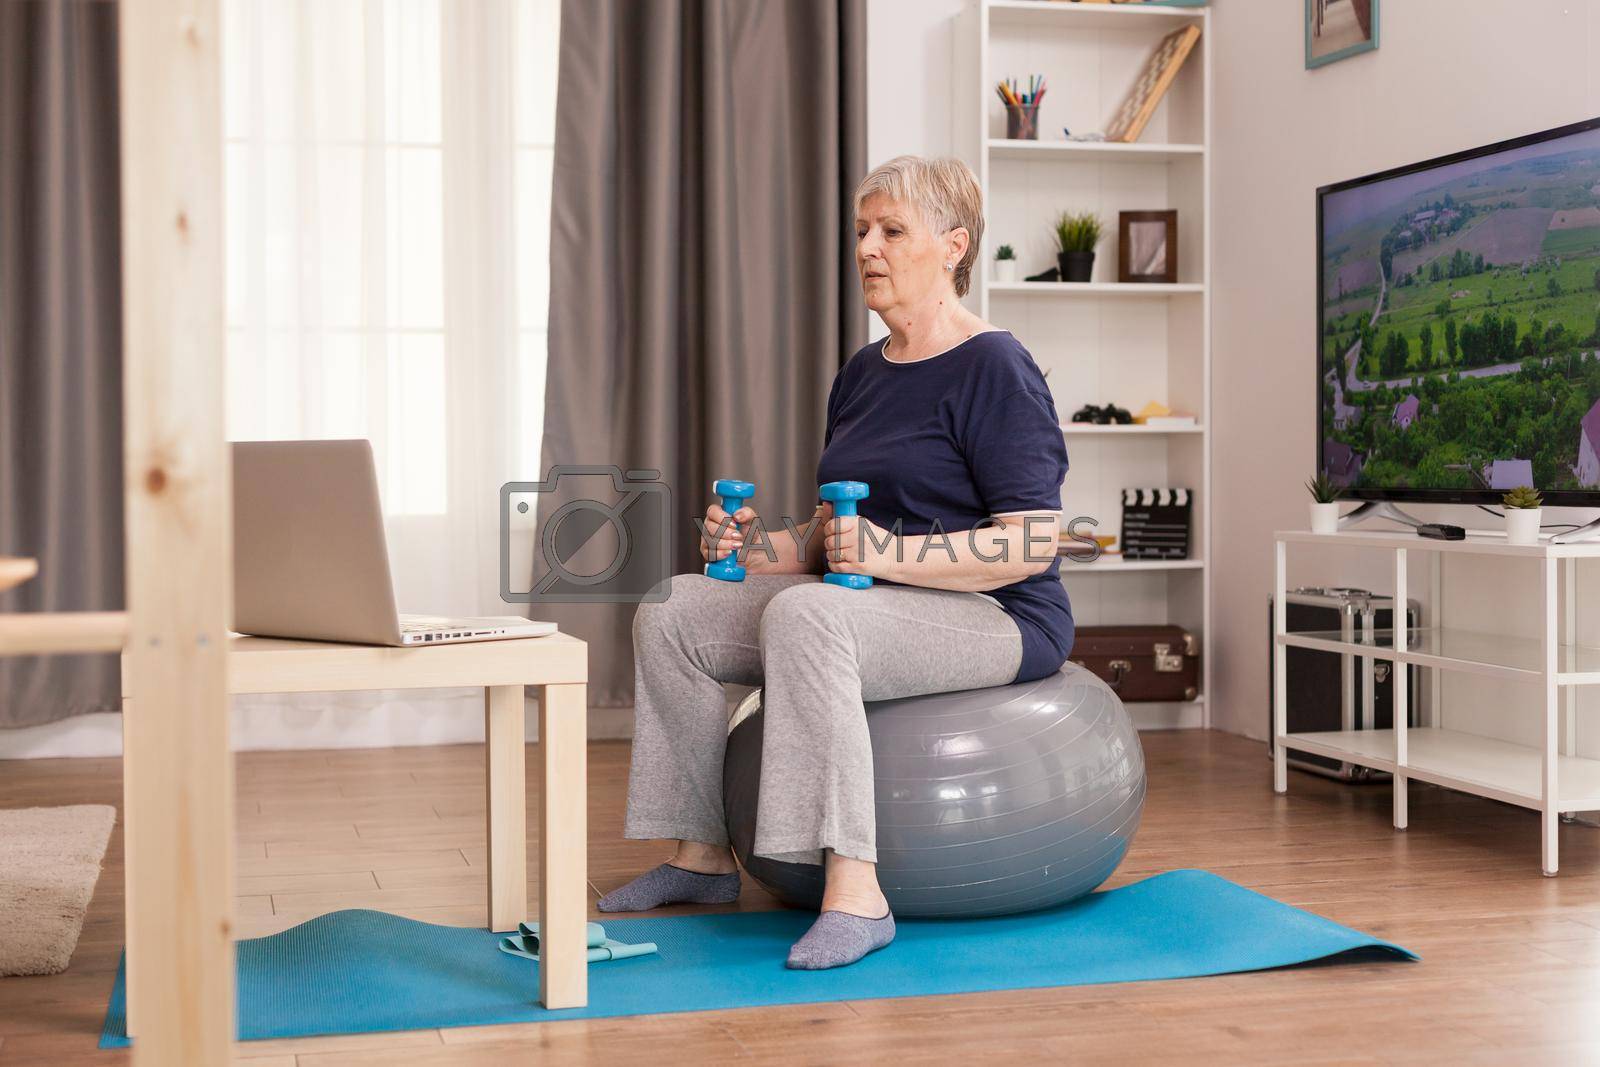 Old housewife watching online fitness lesson at home. Old person pensioner online internet exercise training at home sport activity with dumbbell, resistance band, swiss ball at elderly retirement age